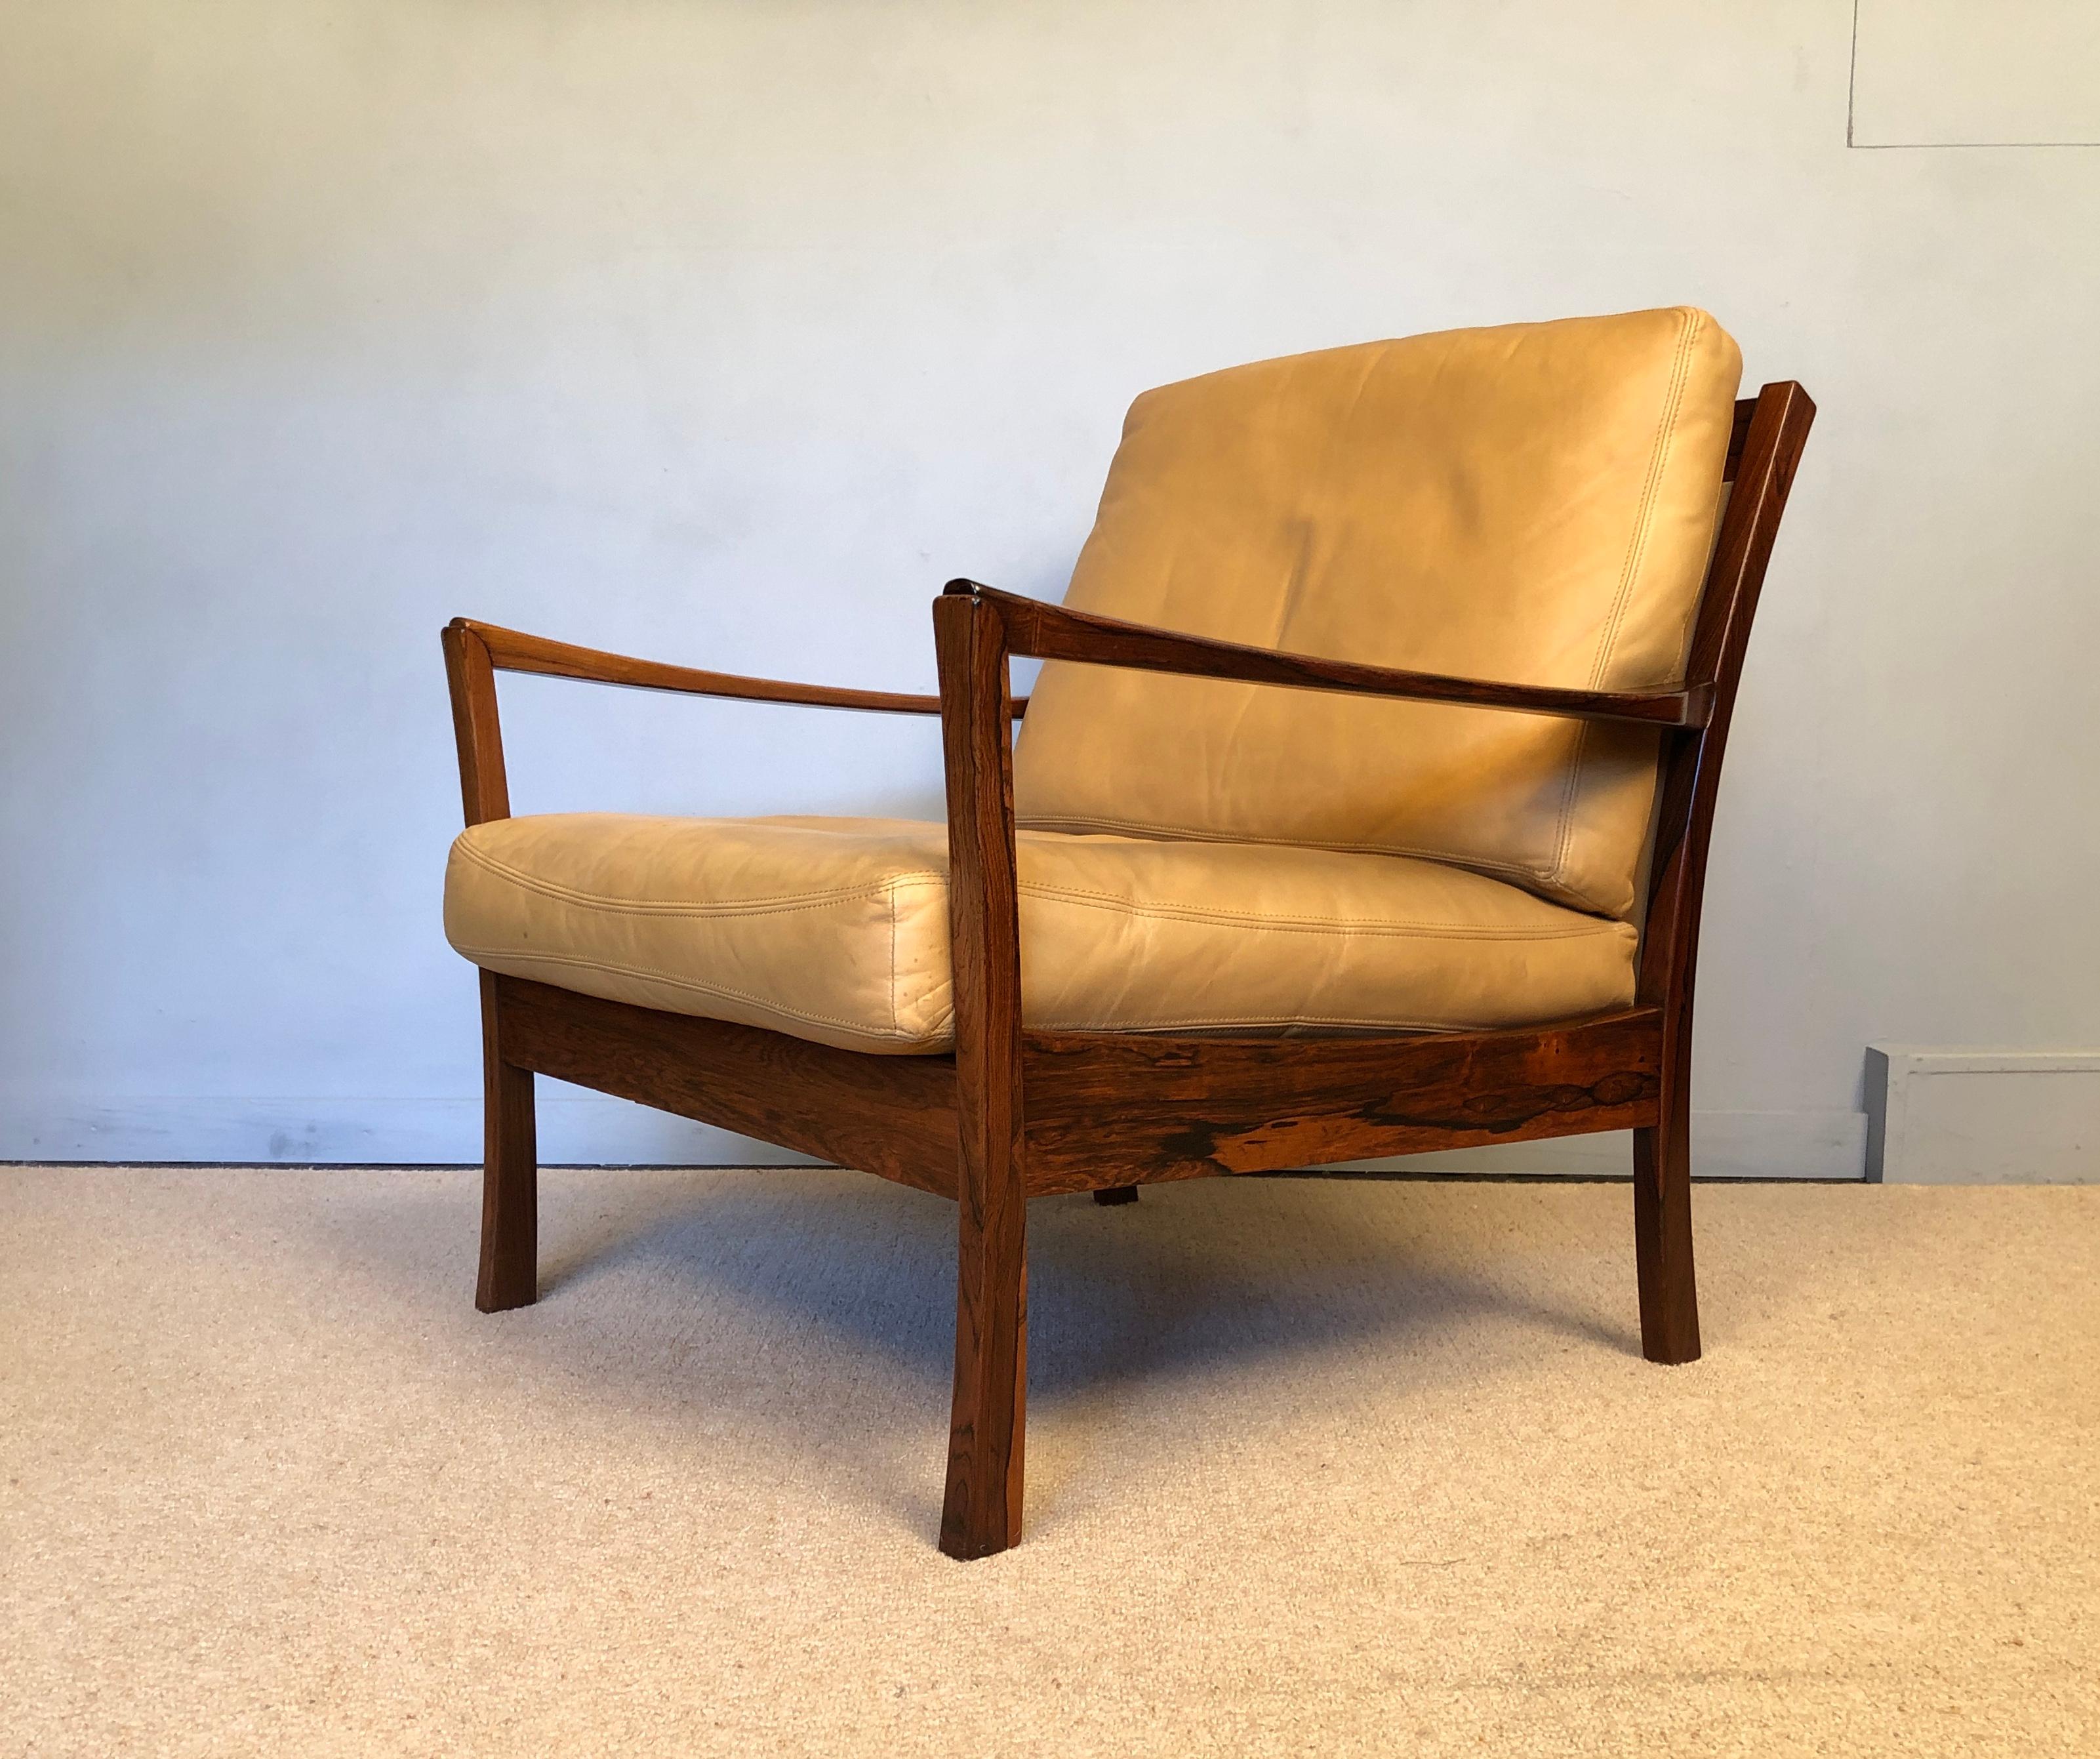 A Danish midcentury rosewood lounge chair. Unique and very unusual design with complex sculpted arm joints and tapered curves to the legs. An accomplished Scandinavian craftsman piece. Lovely rosewood frames with curved detail to the tan leather